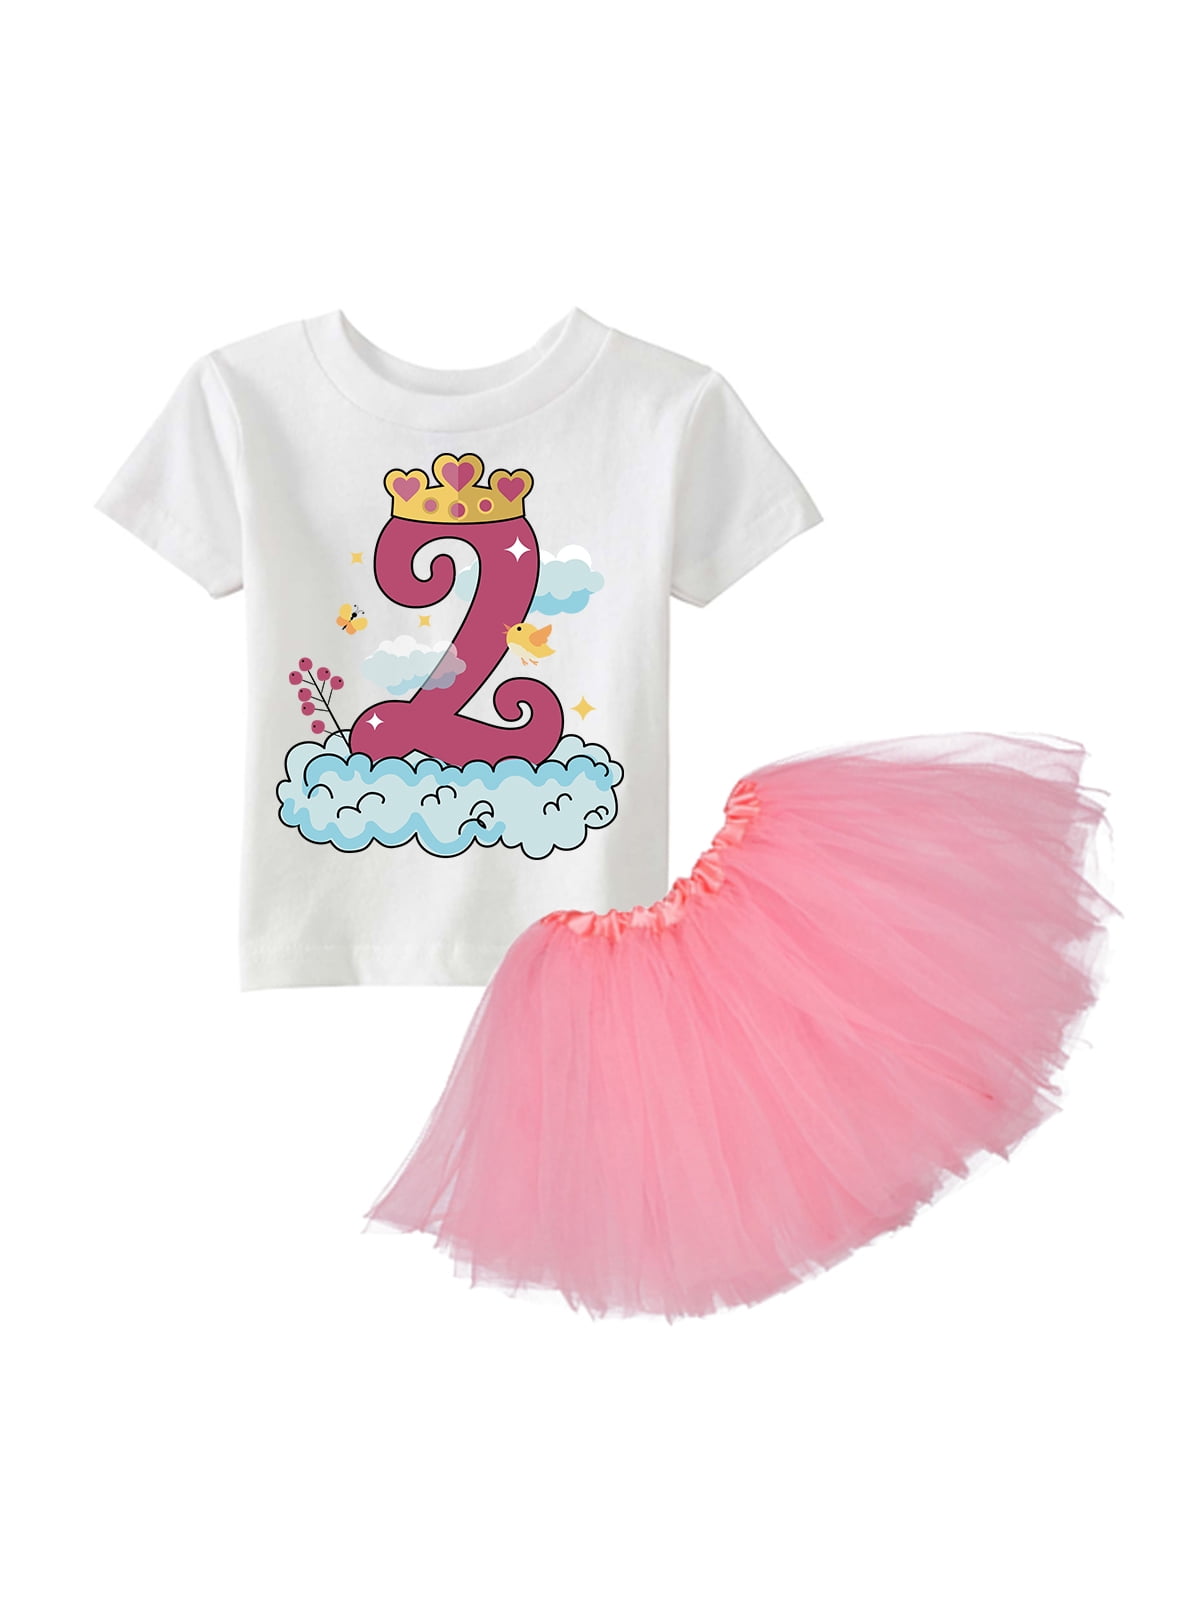 Luxury Kid Girls Second 2nd Birthday T-Shirt Two Cute Top Outfit Vest Set 18-24 